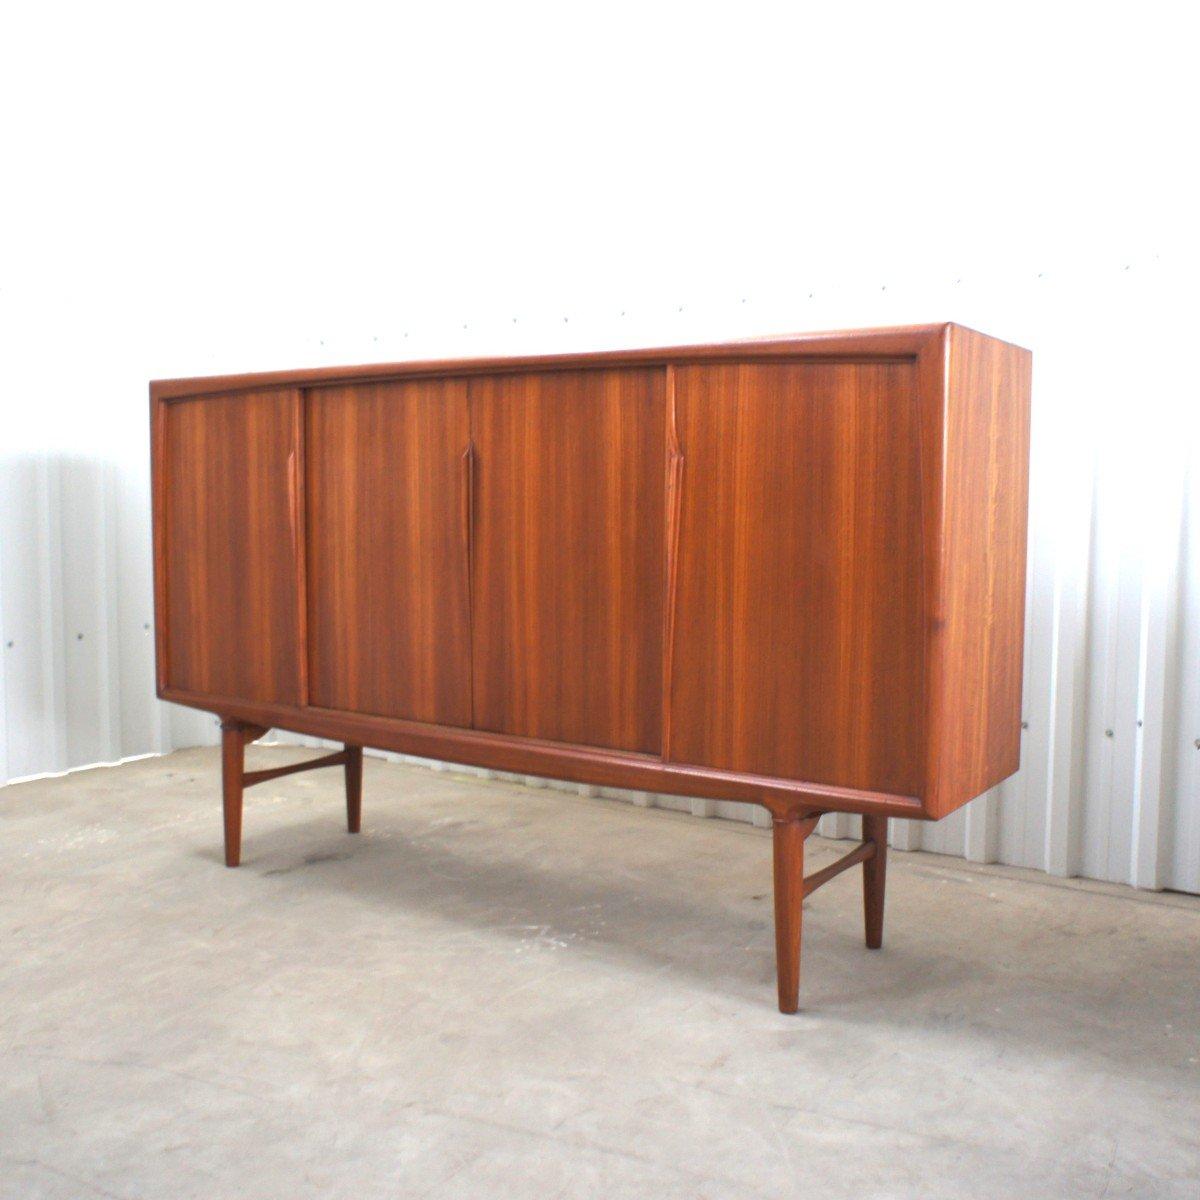 Rare and sculptural scandinavian sideborad by Axel Christensen for ACO Mobler, from the end of the 1950's. The footing has a slight compass shape. It has four sliding doors. with each handles carfeully designed. Each door reveales teak shelves and